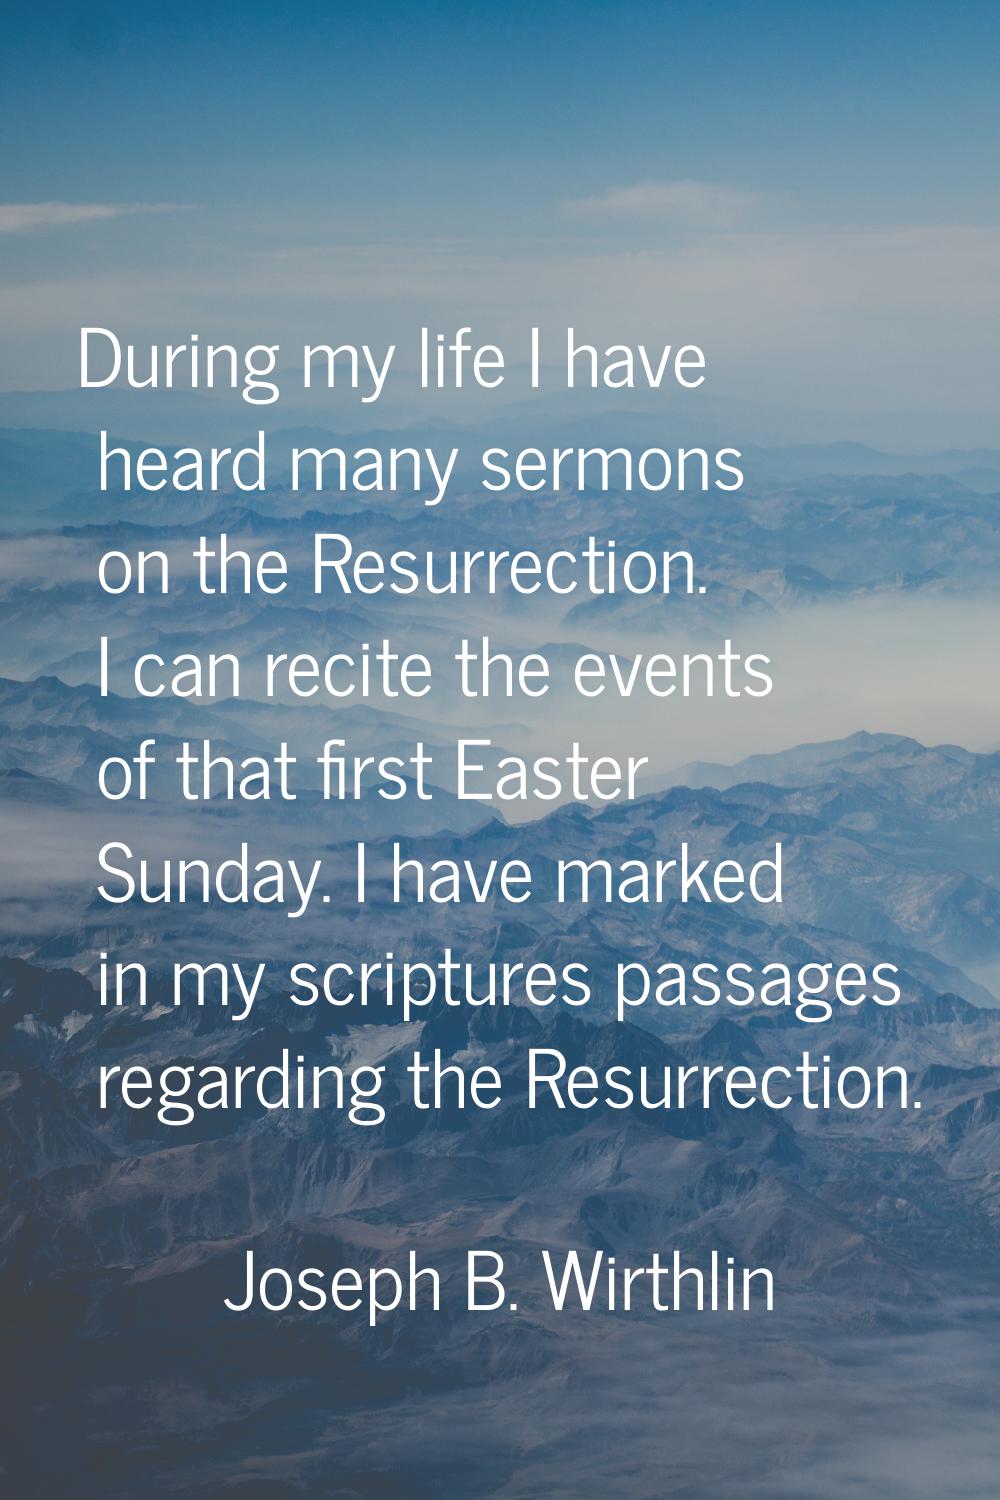 During my life I have heard many sermons on the Resurrection. I can recite the events of that first